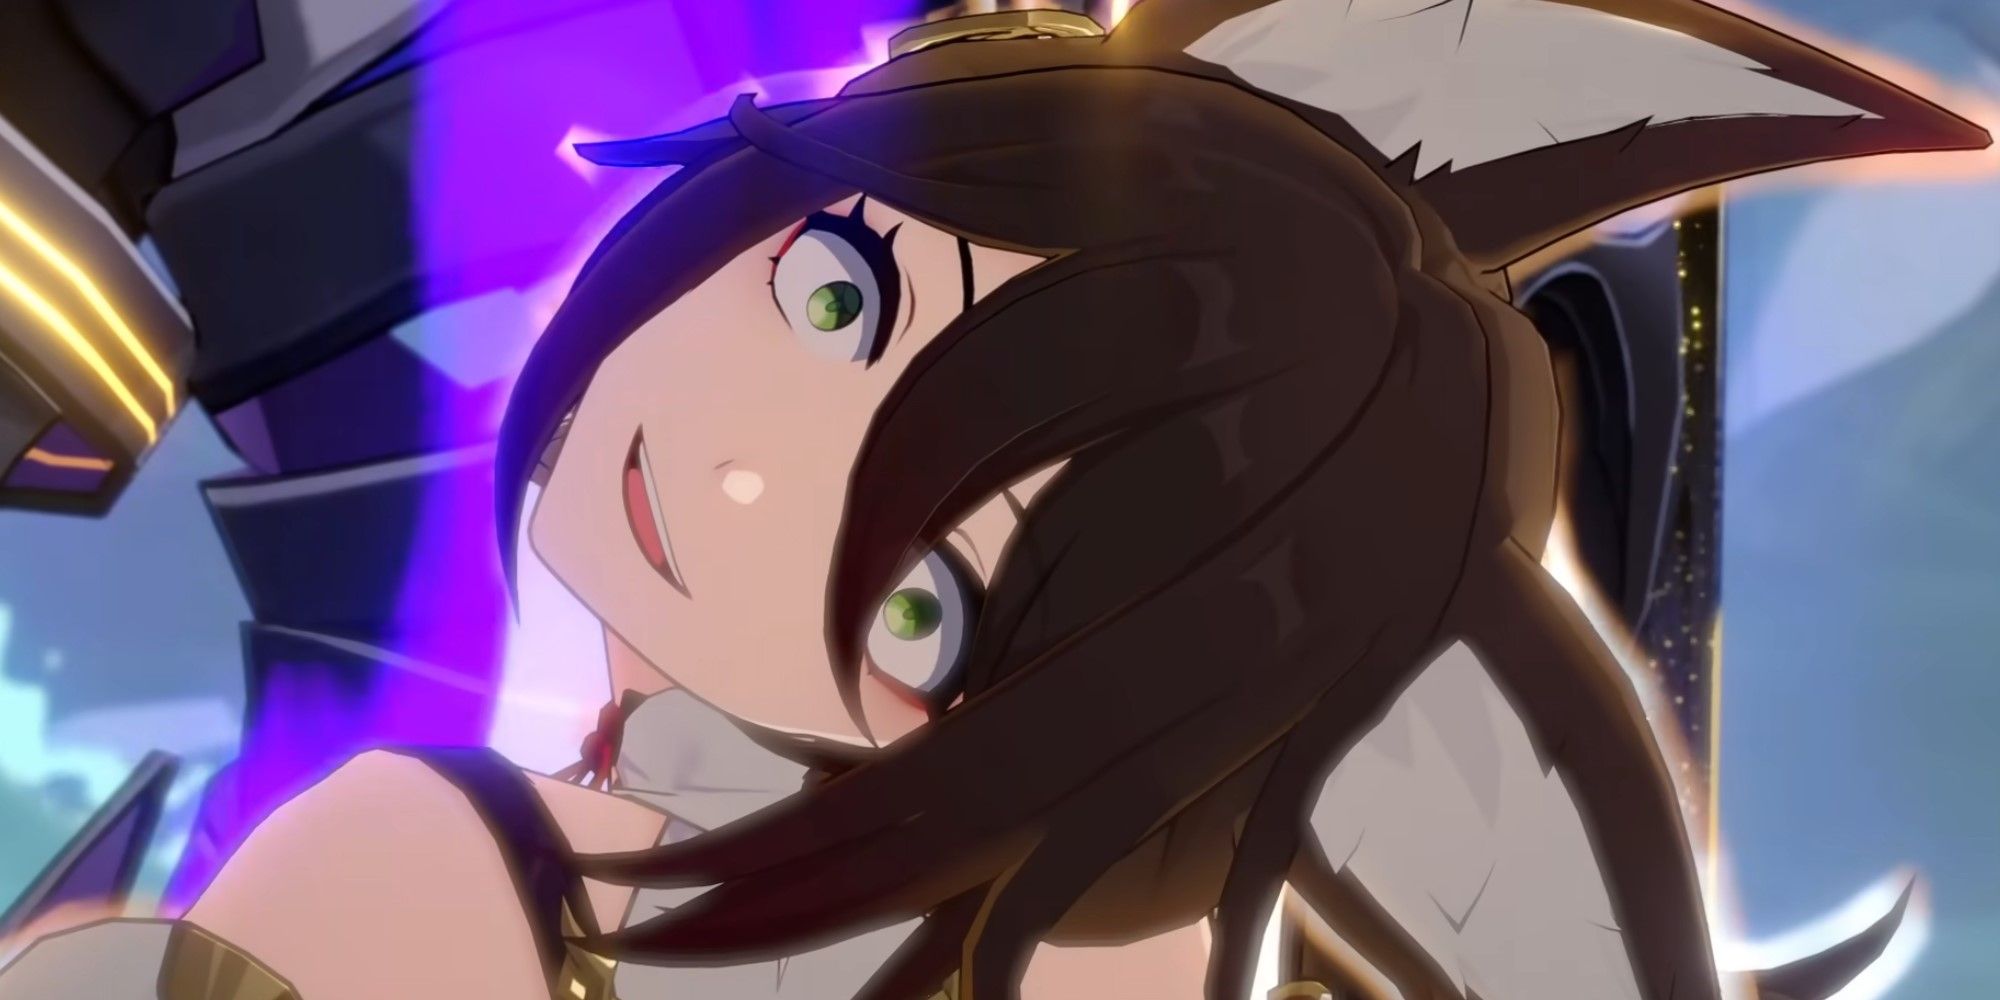 Tingyun looks back with an insane look in her eyes in Honkai Star Rail.